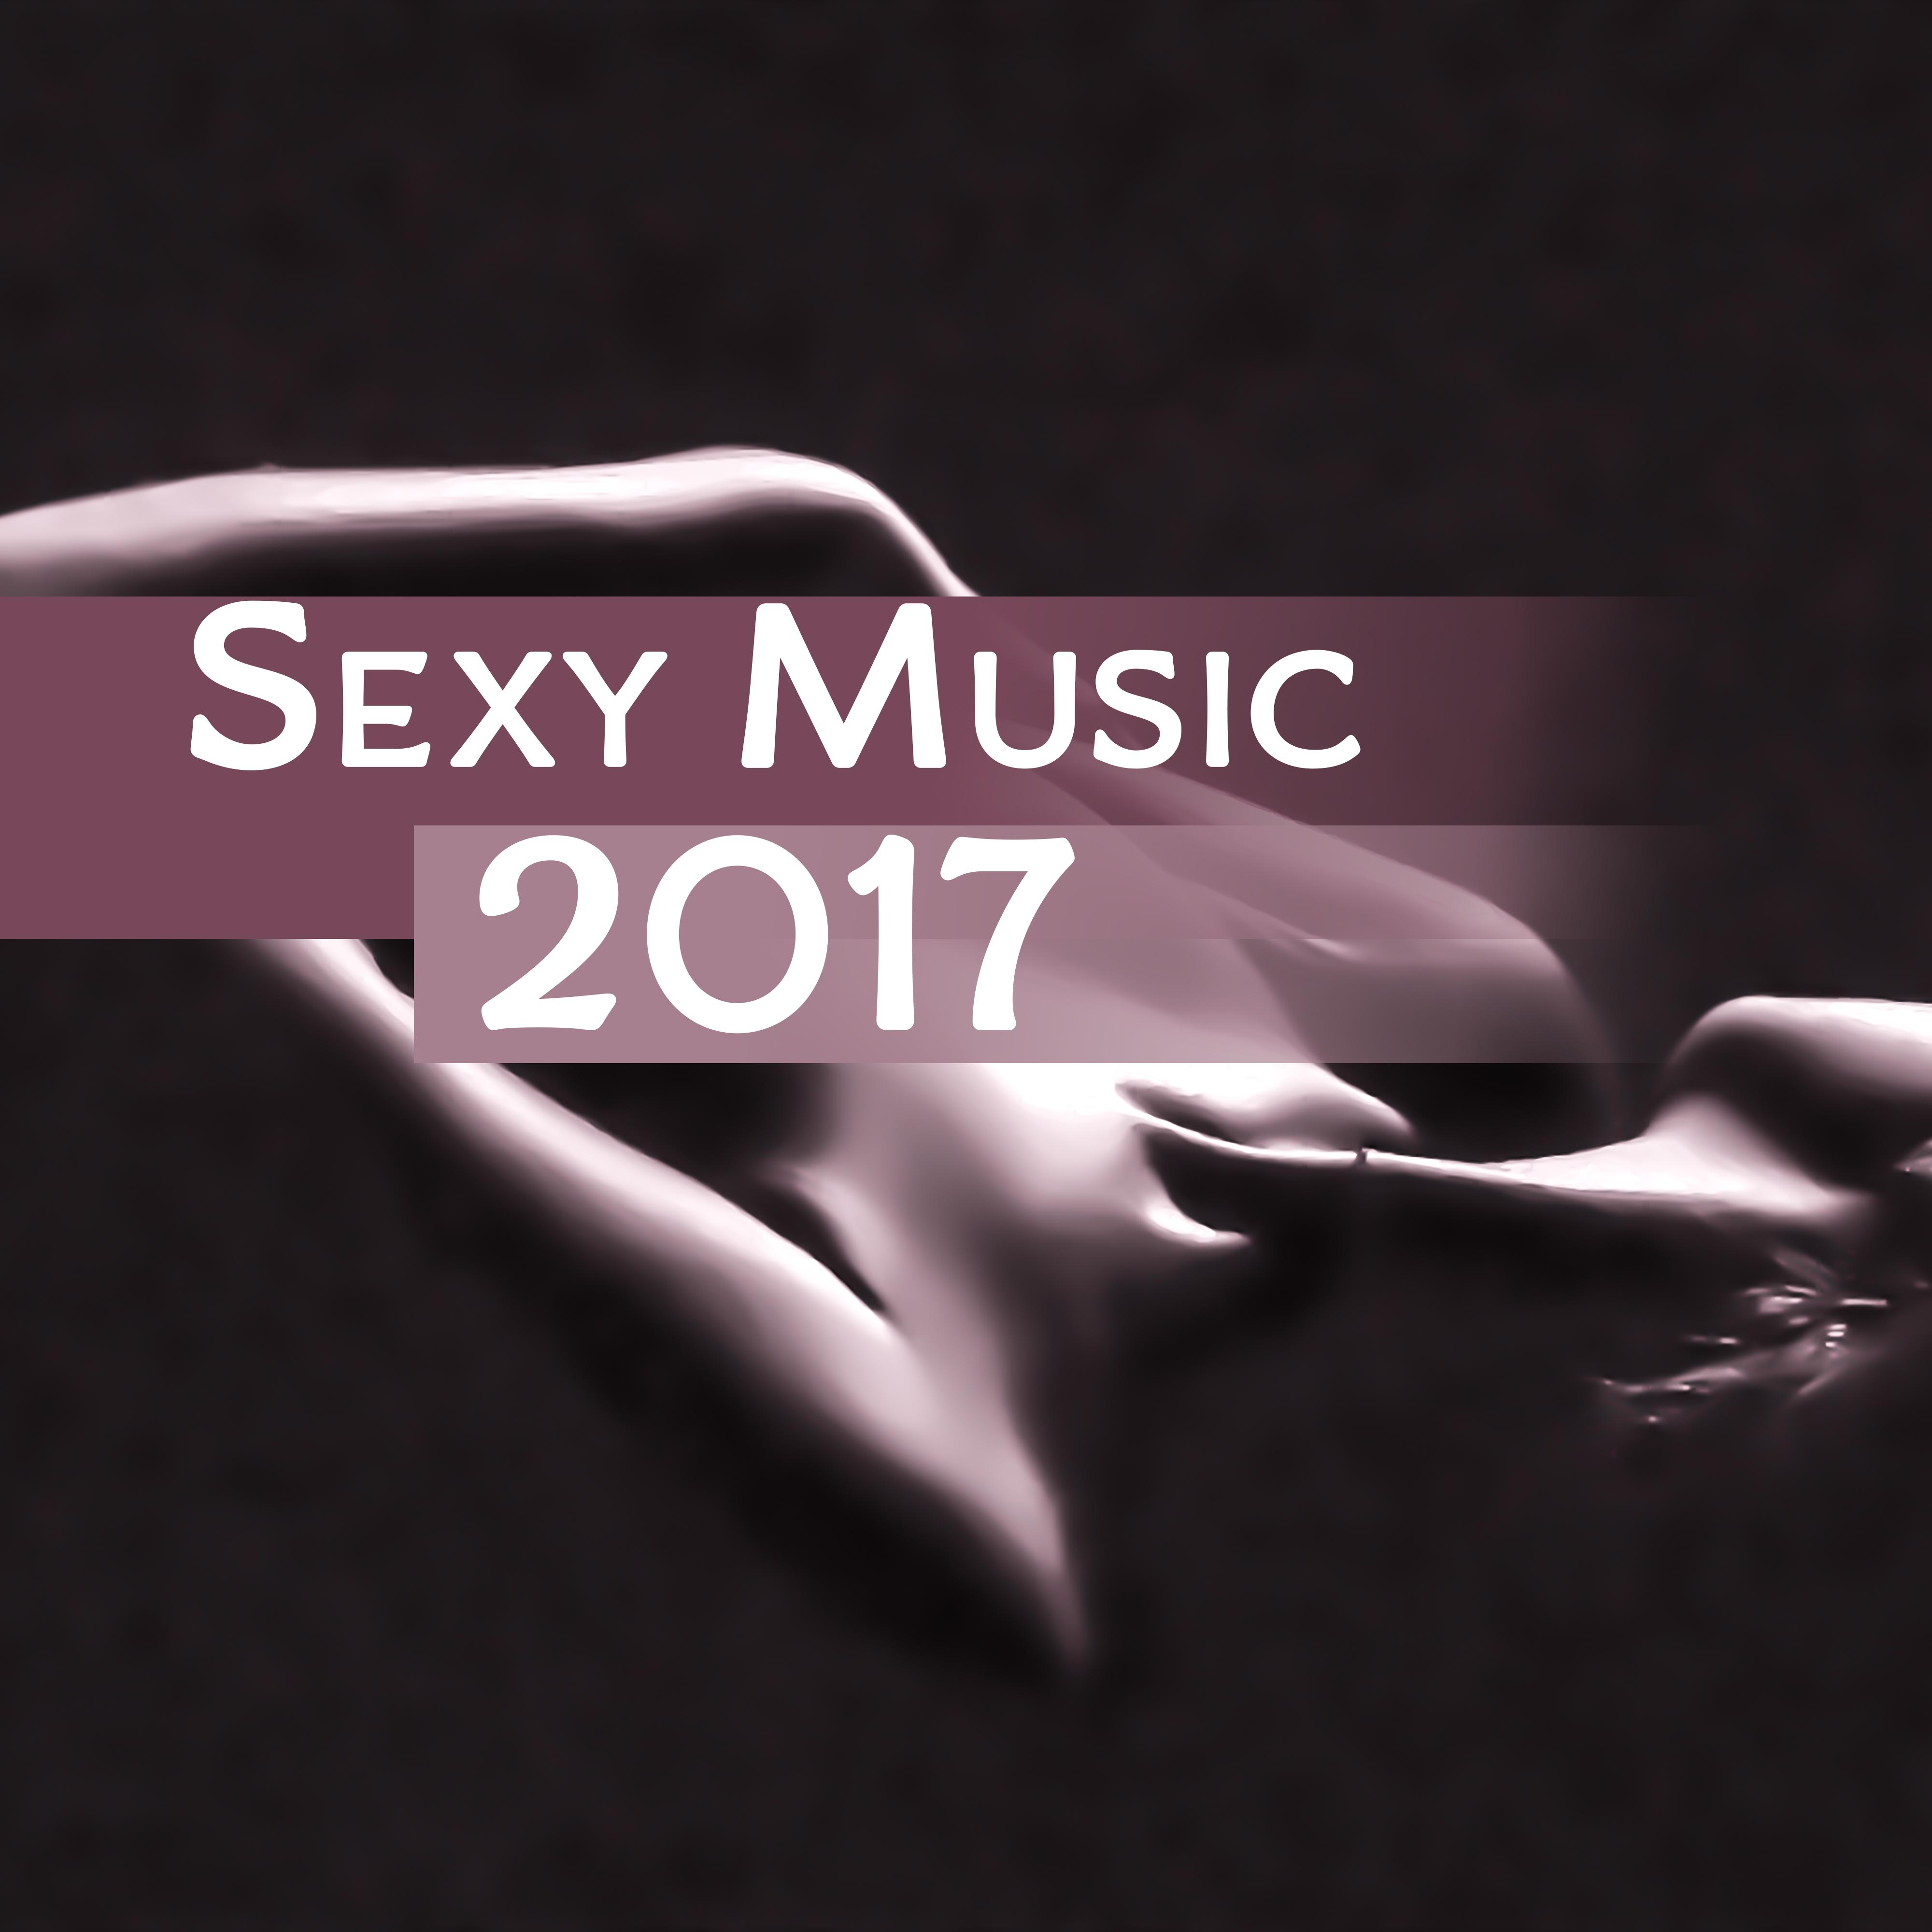 Sexy Music 2017 – Deep Massage, Peaceful Music for Lovers, Erotic Lounge, Relaxation, Nature Sounds, Ambient Music